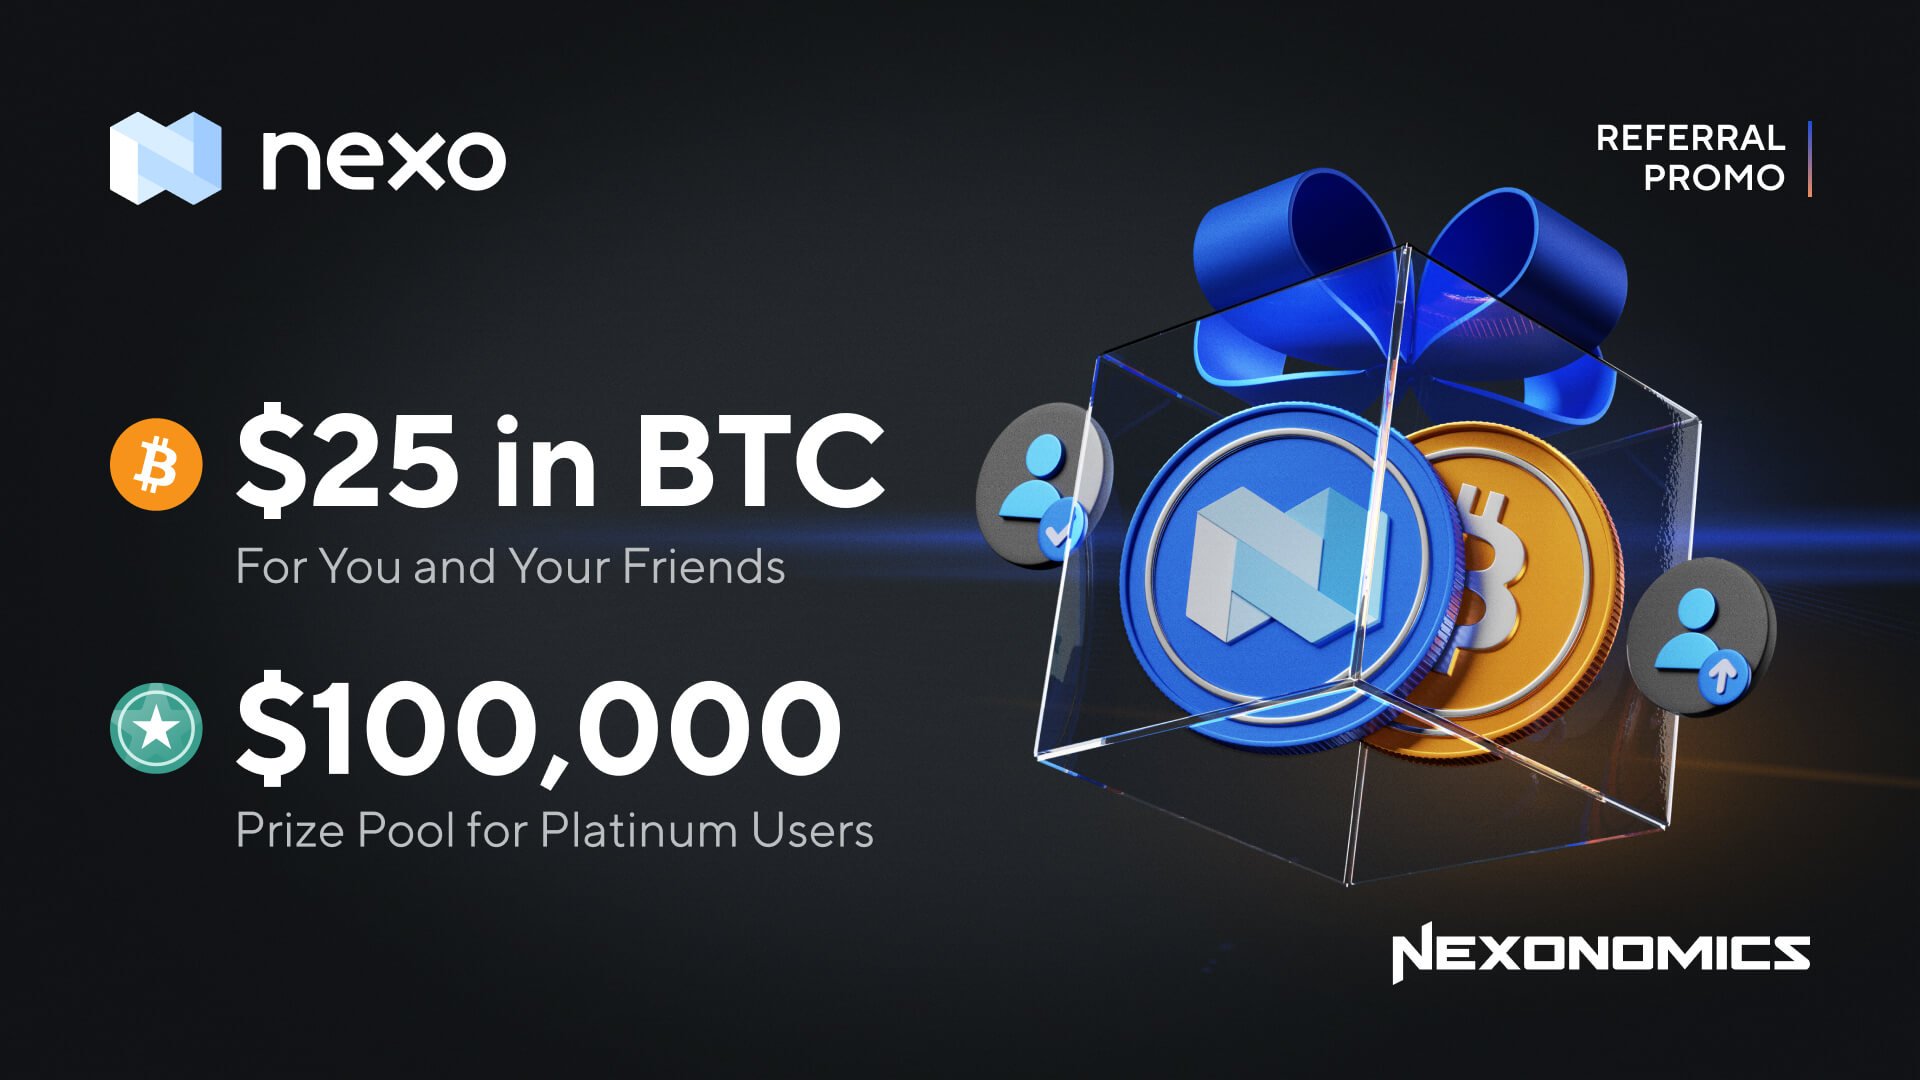 Nexonomics Is Back With a Bang & a Referral Promo!